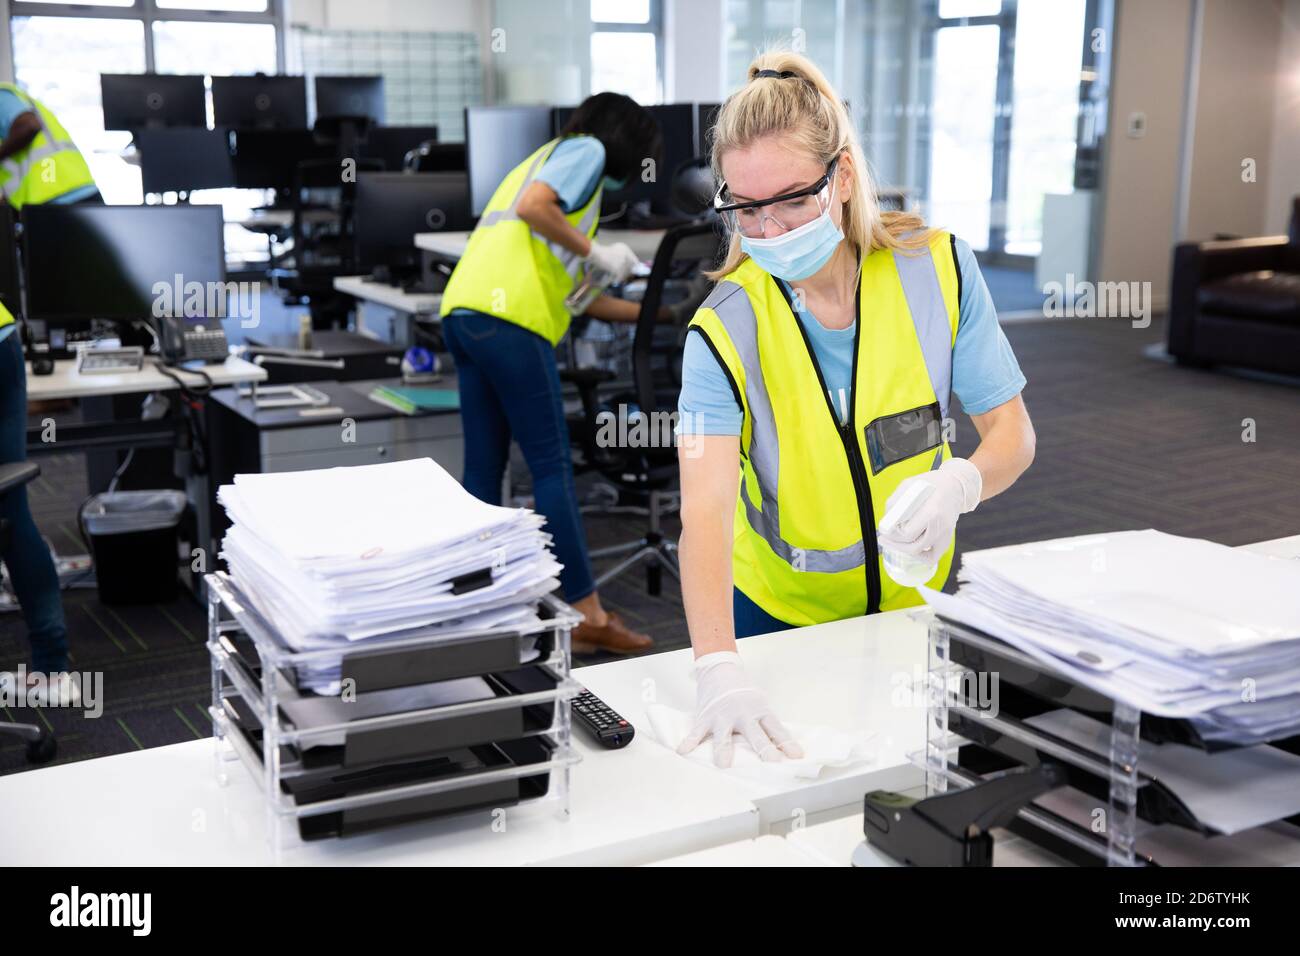 Woman wearing hi vis vest and face mask cleaning the office using disinfectant Stock Photo